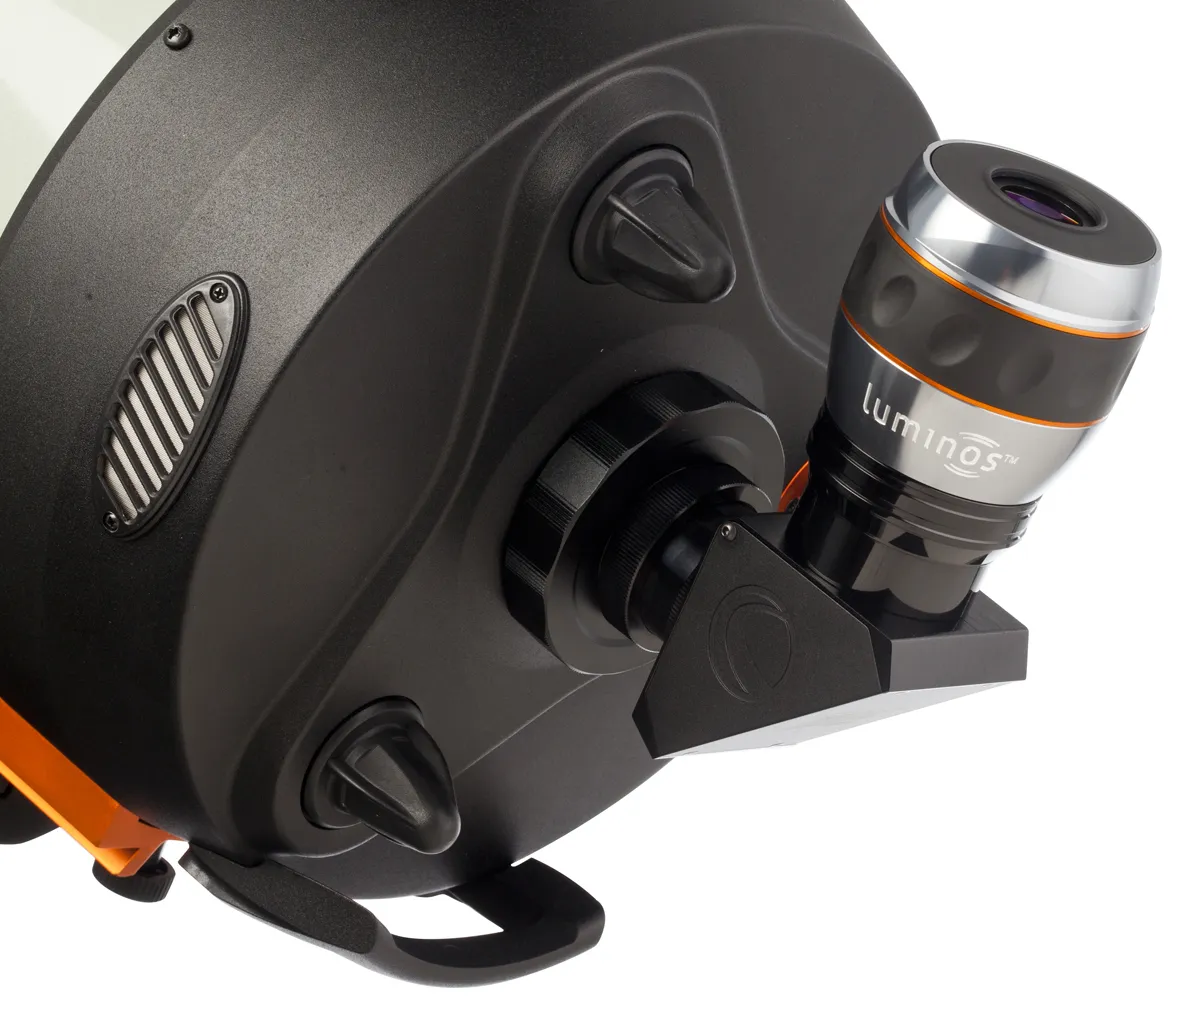 Celestron 2-inch diagonal with XLT coatings